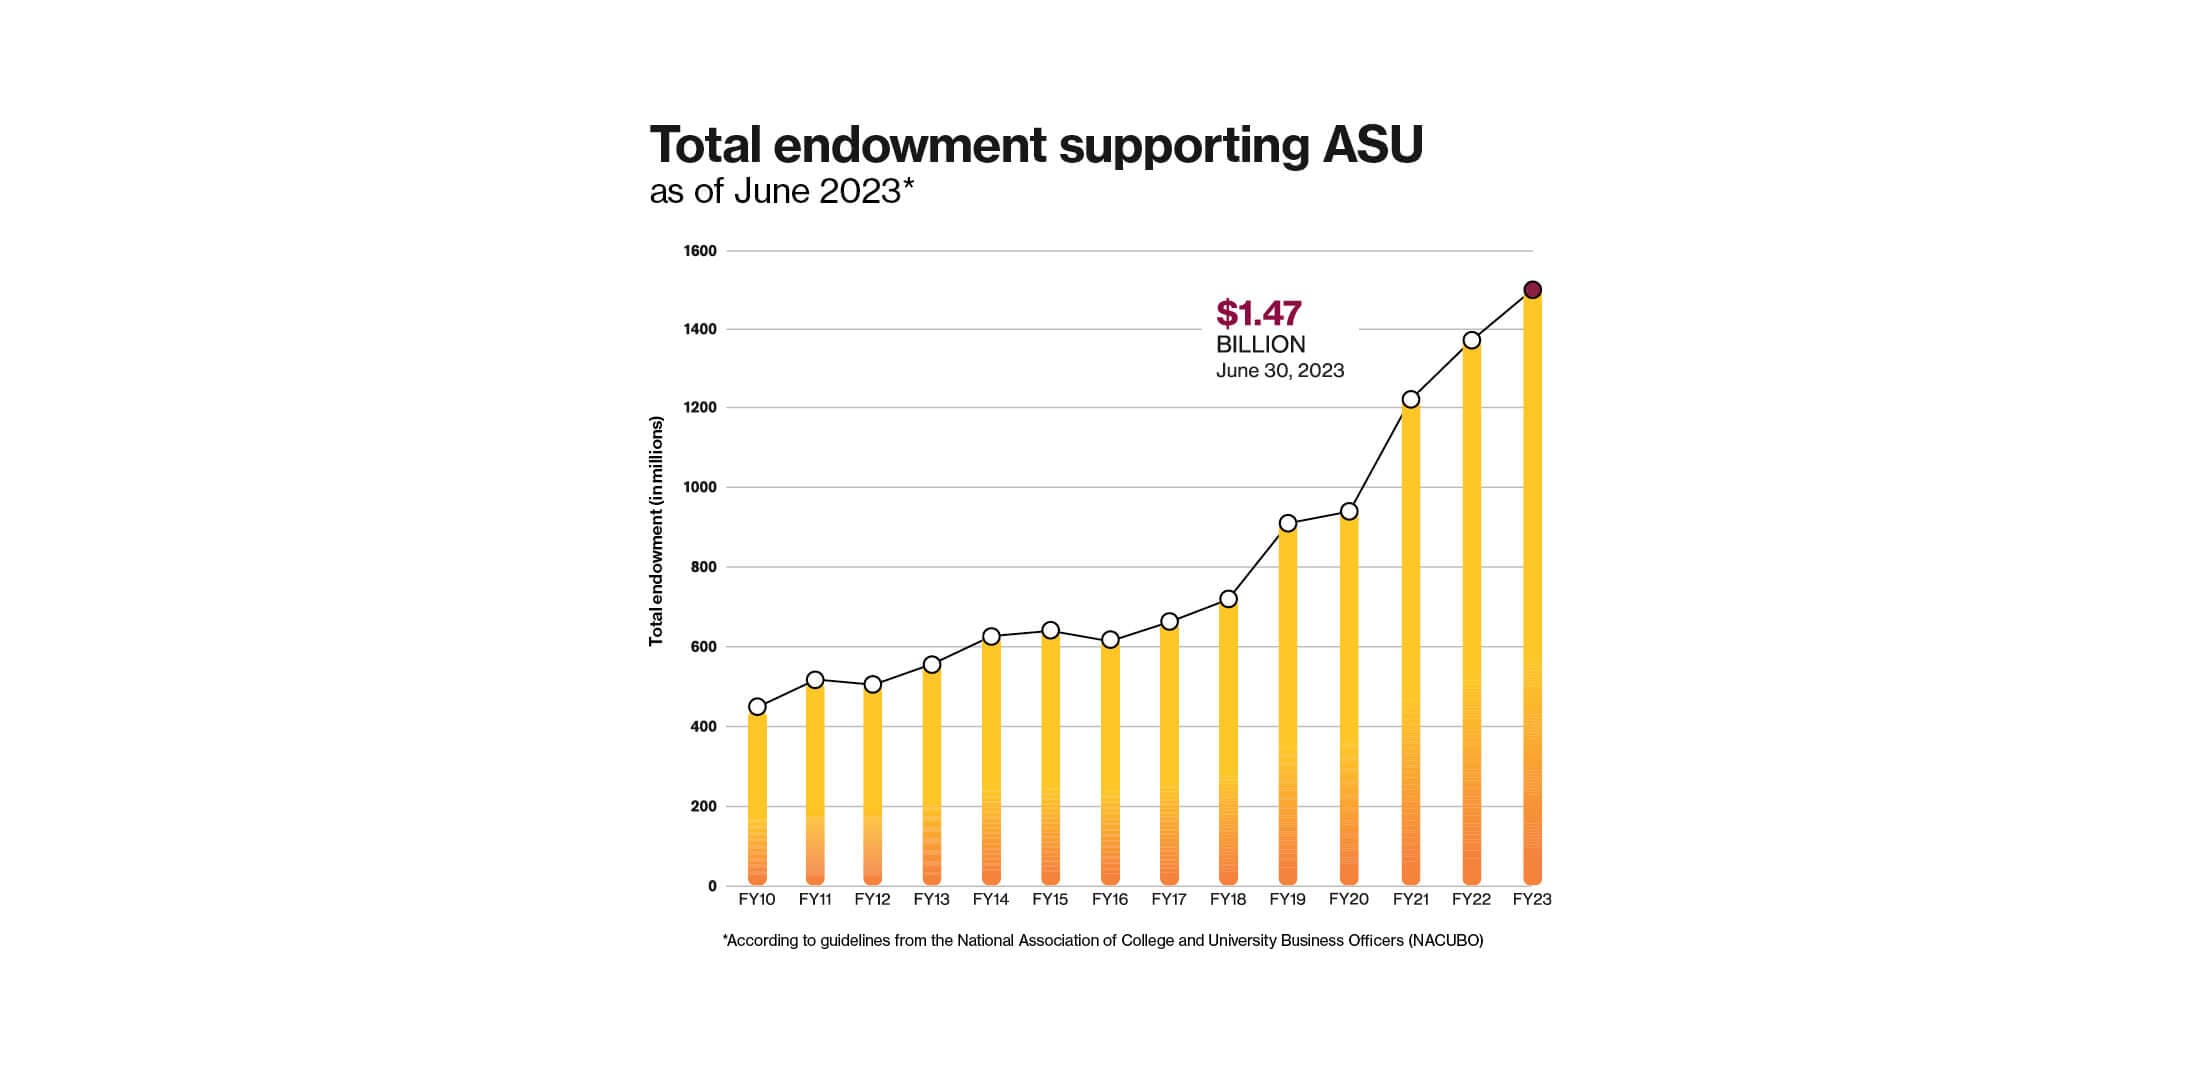 Total endowment supporting ASU as of June 2023.